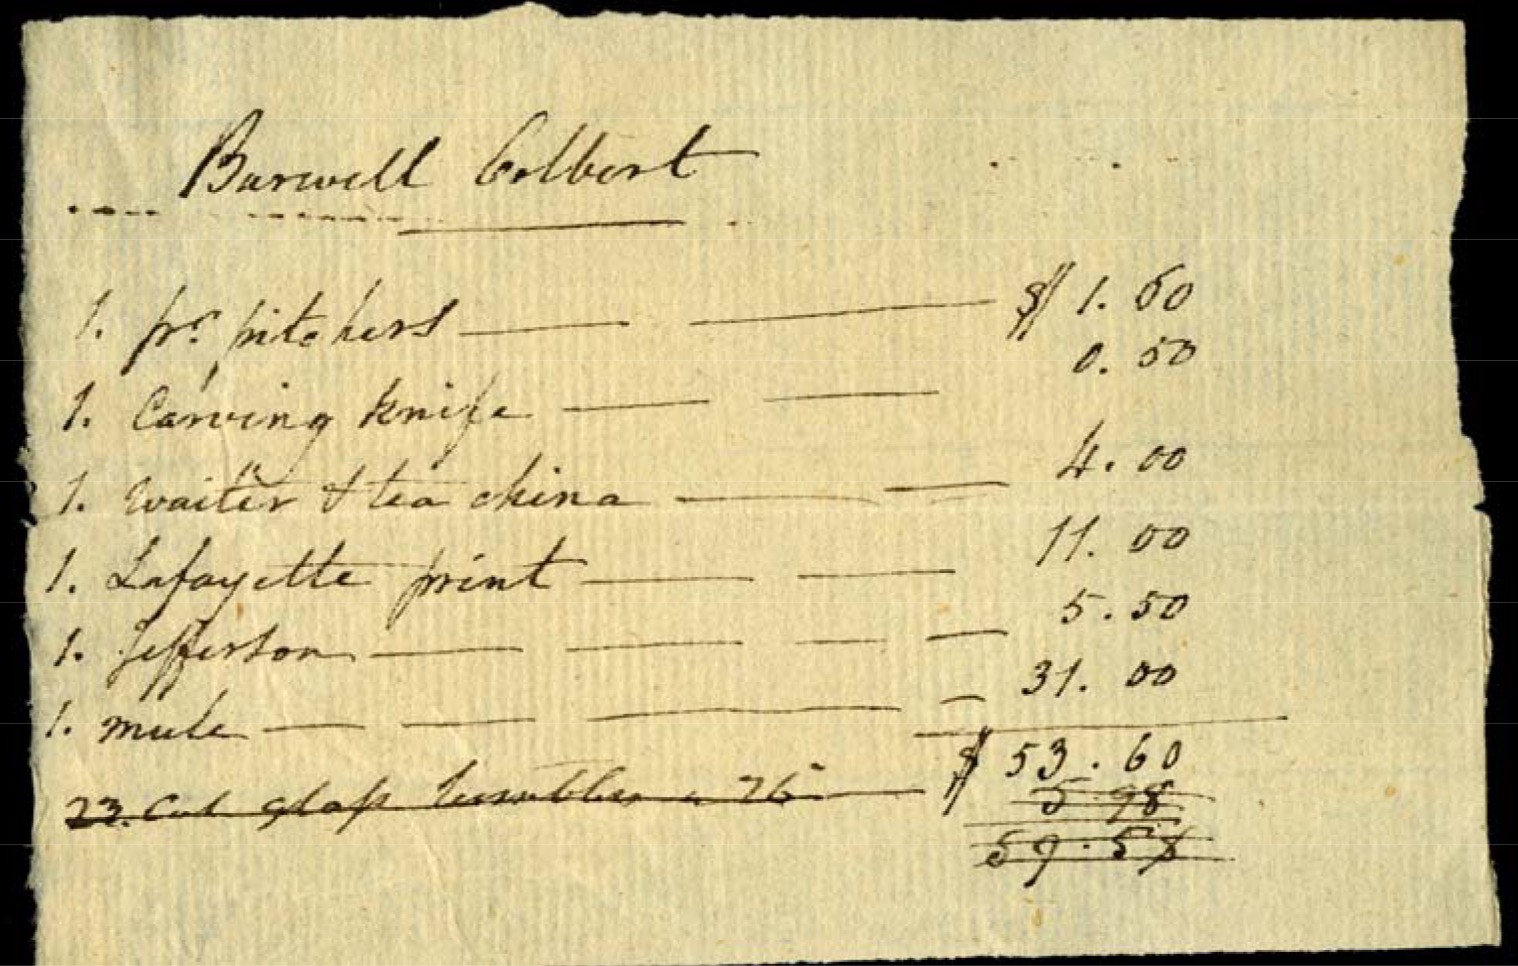 Purchases at the 1827 sale by Burwell Colbert